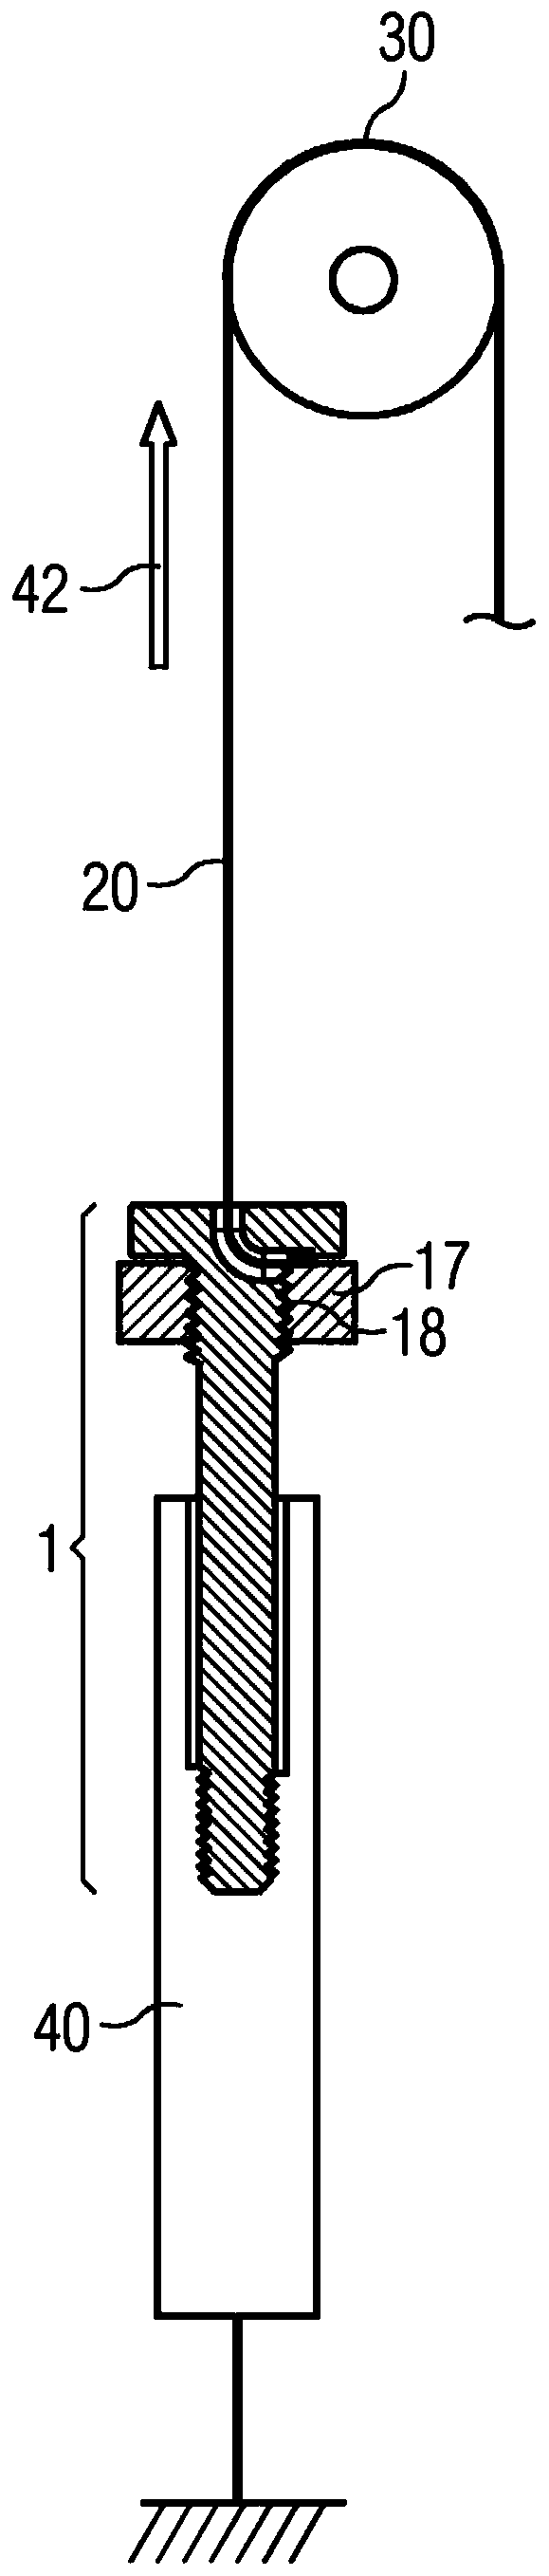 Fastening unit for fastening a clamping element to a unit